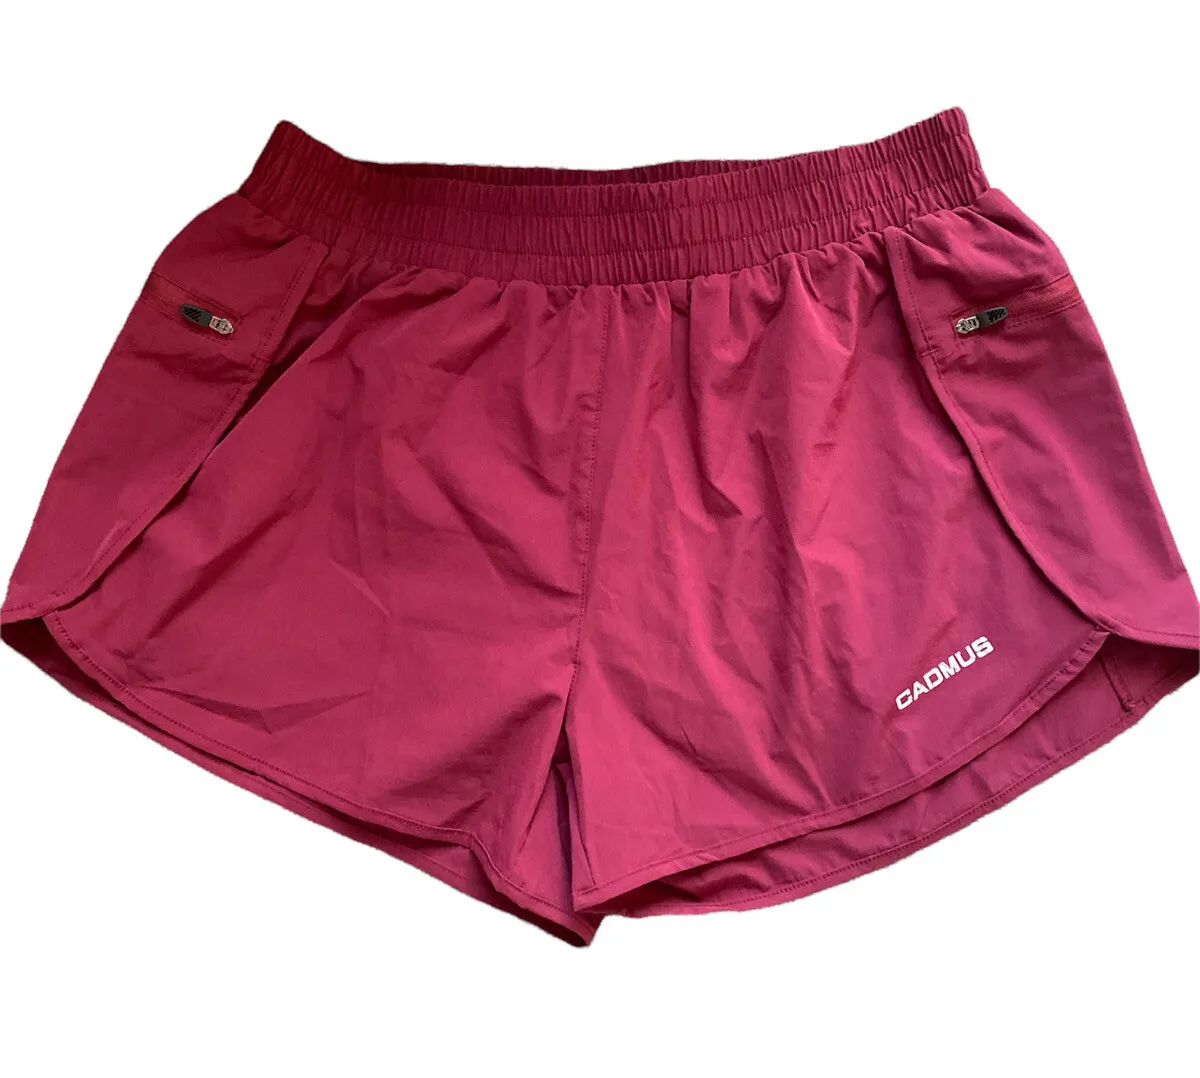 CADMUS 2 in 1 Women's XL Workout Shorts Athletic Gym Running Shorts Phone  pocket